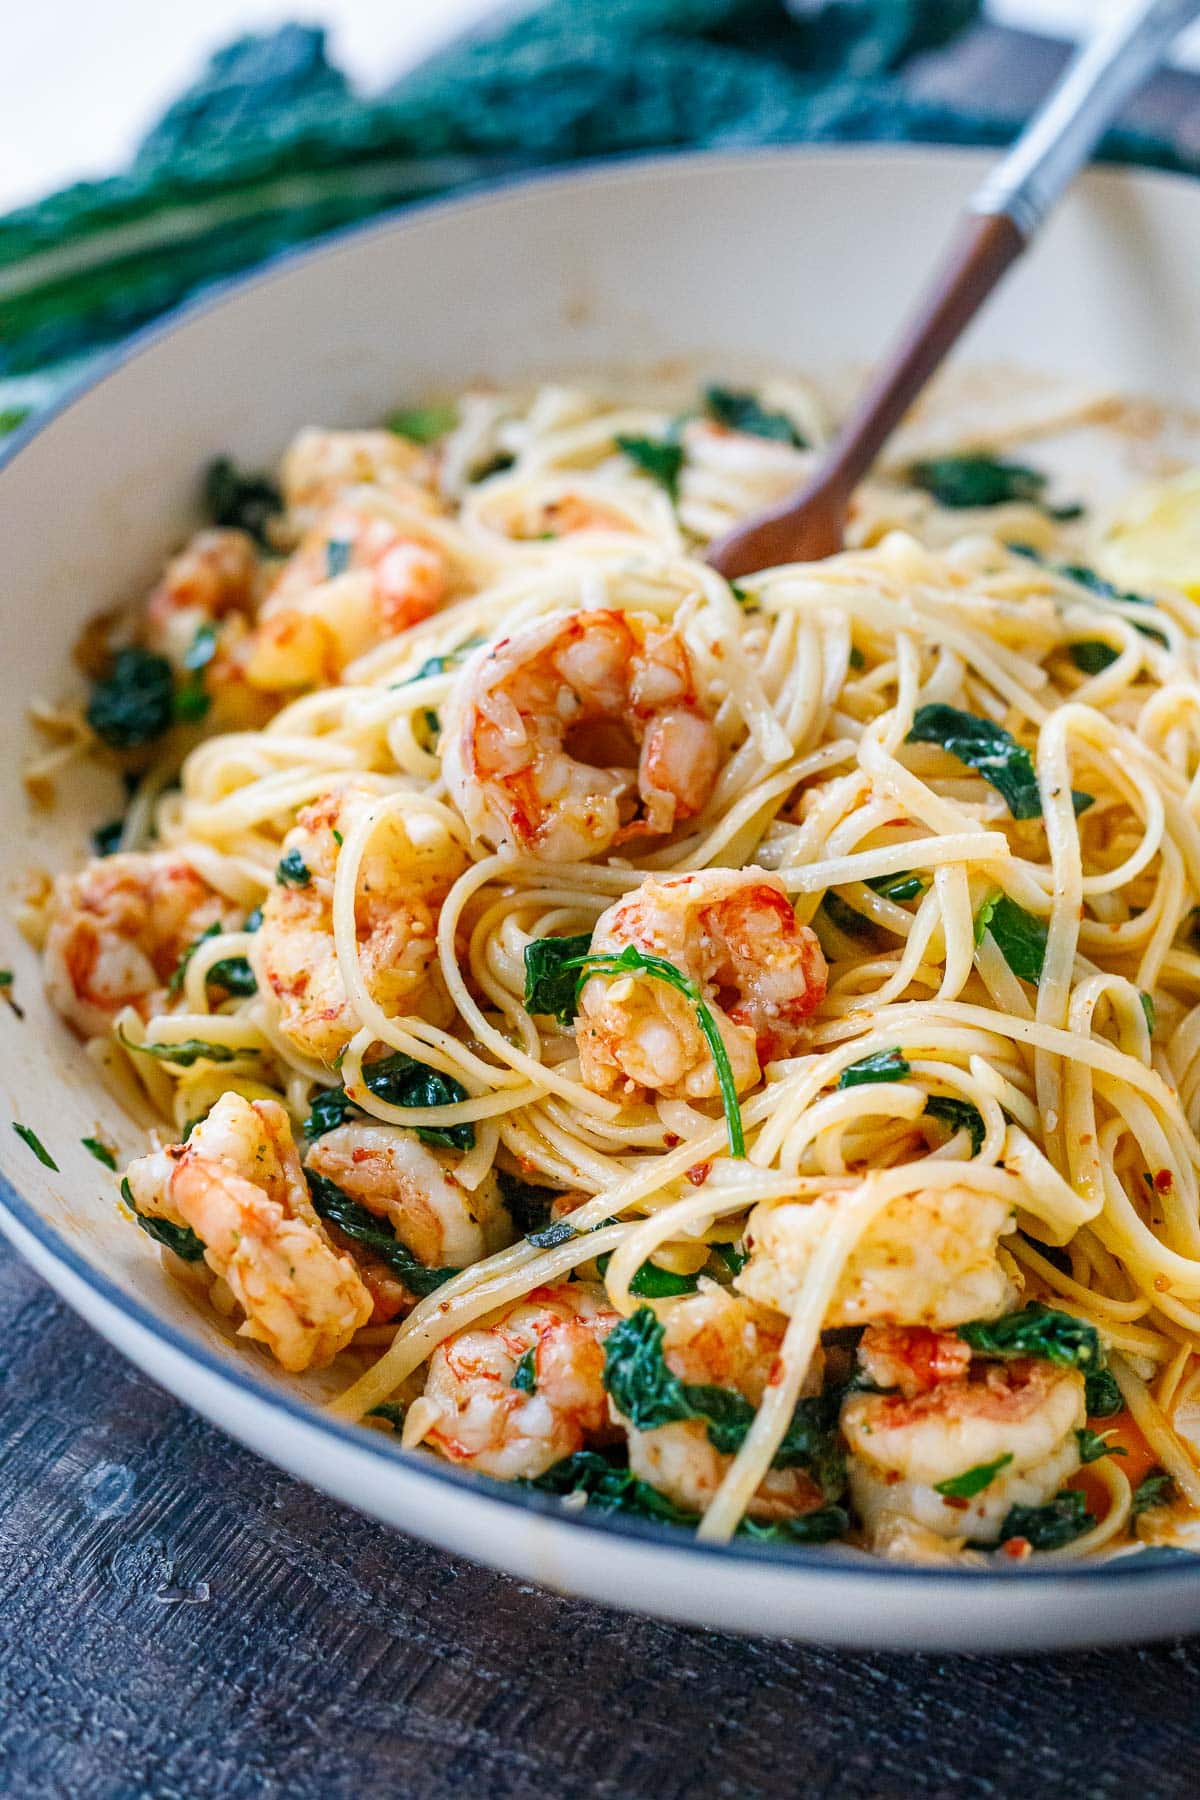 bowl of shrimp pasta with linguine, shrimp, and wilted greens